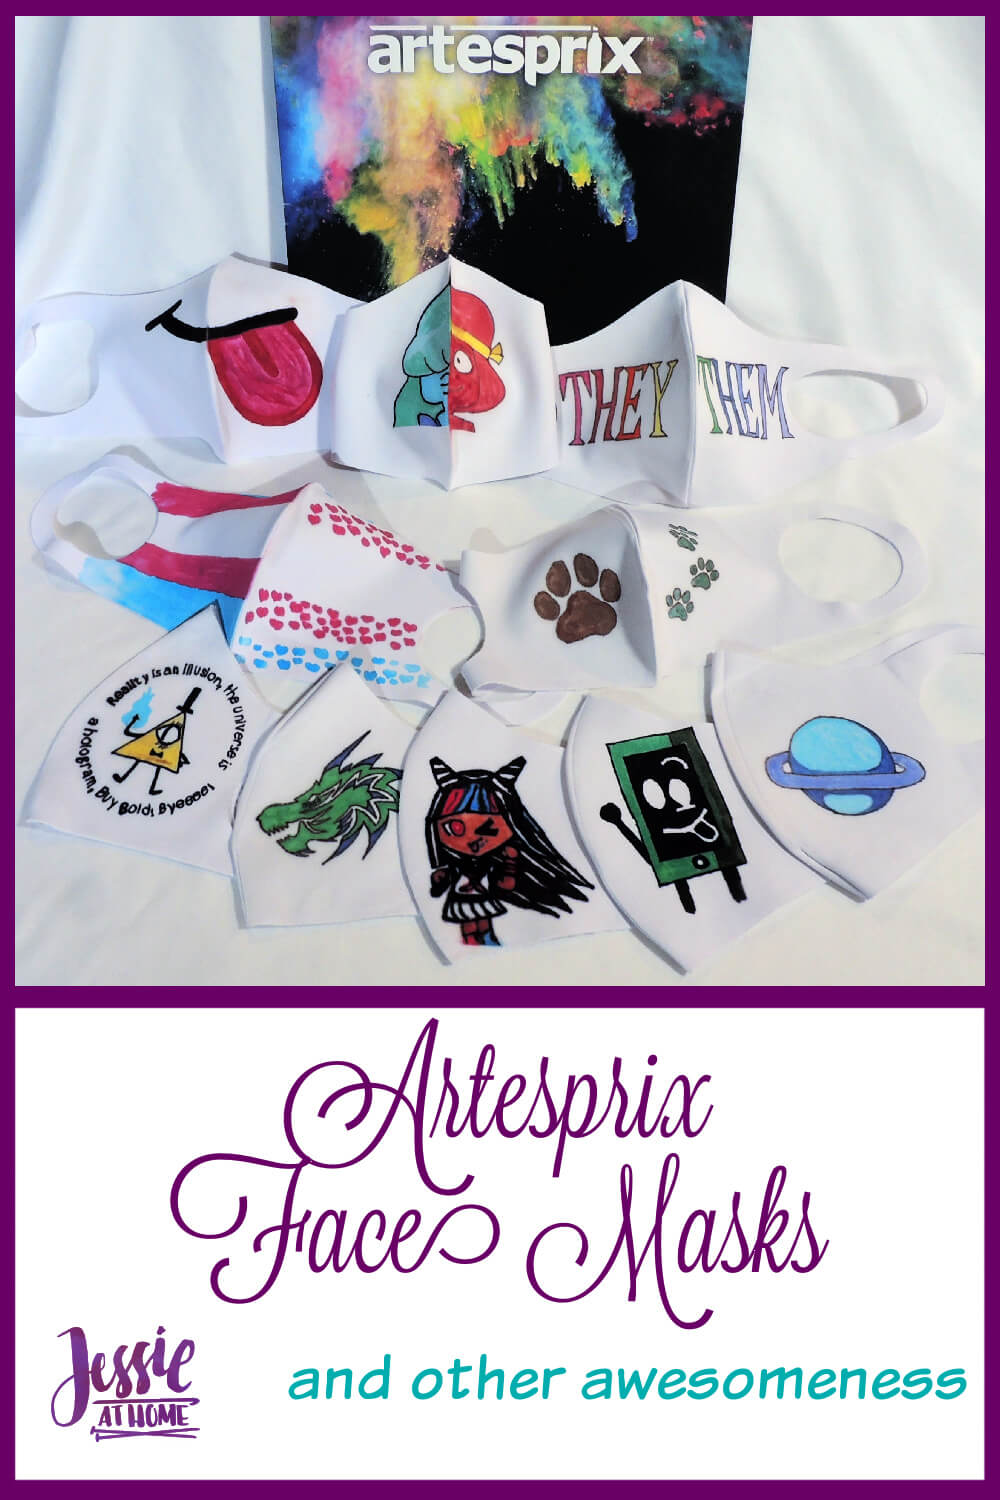 Artesprix Face Masks and Other Awesomeness!